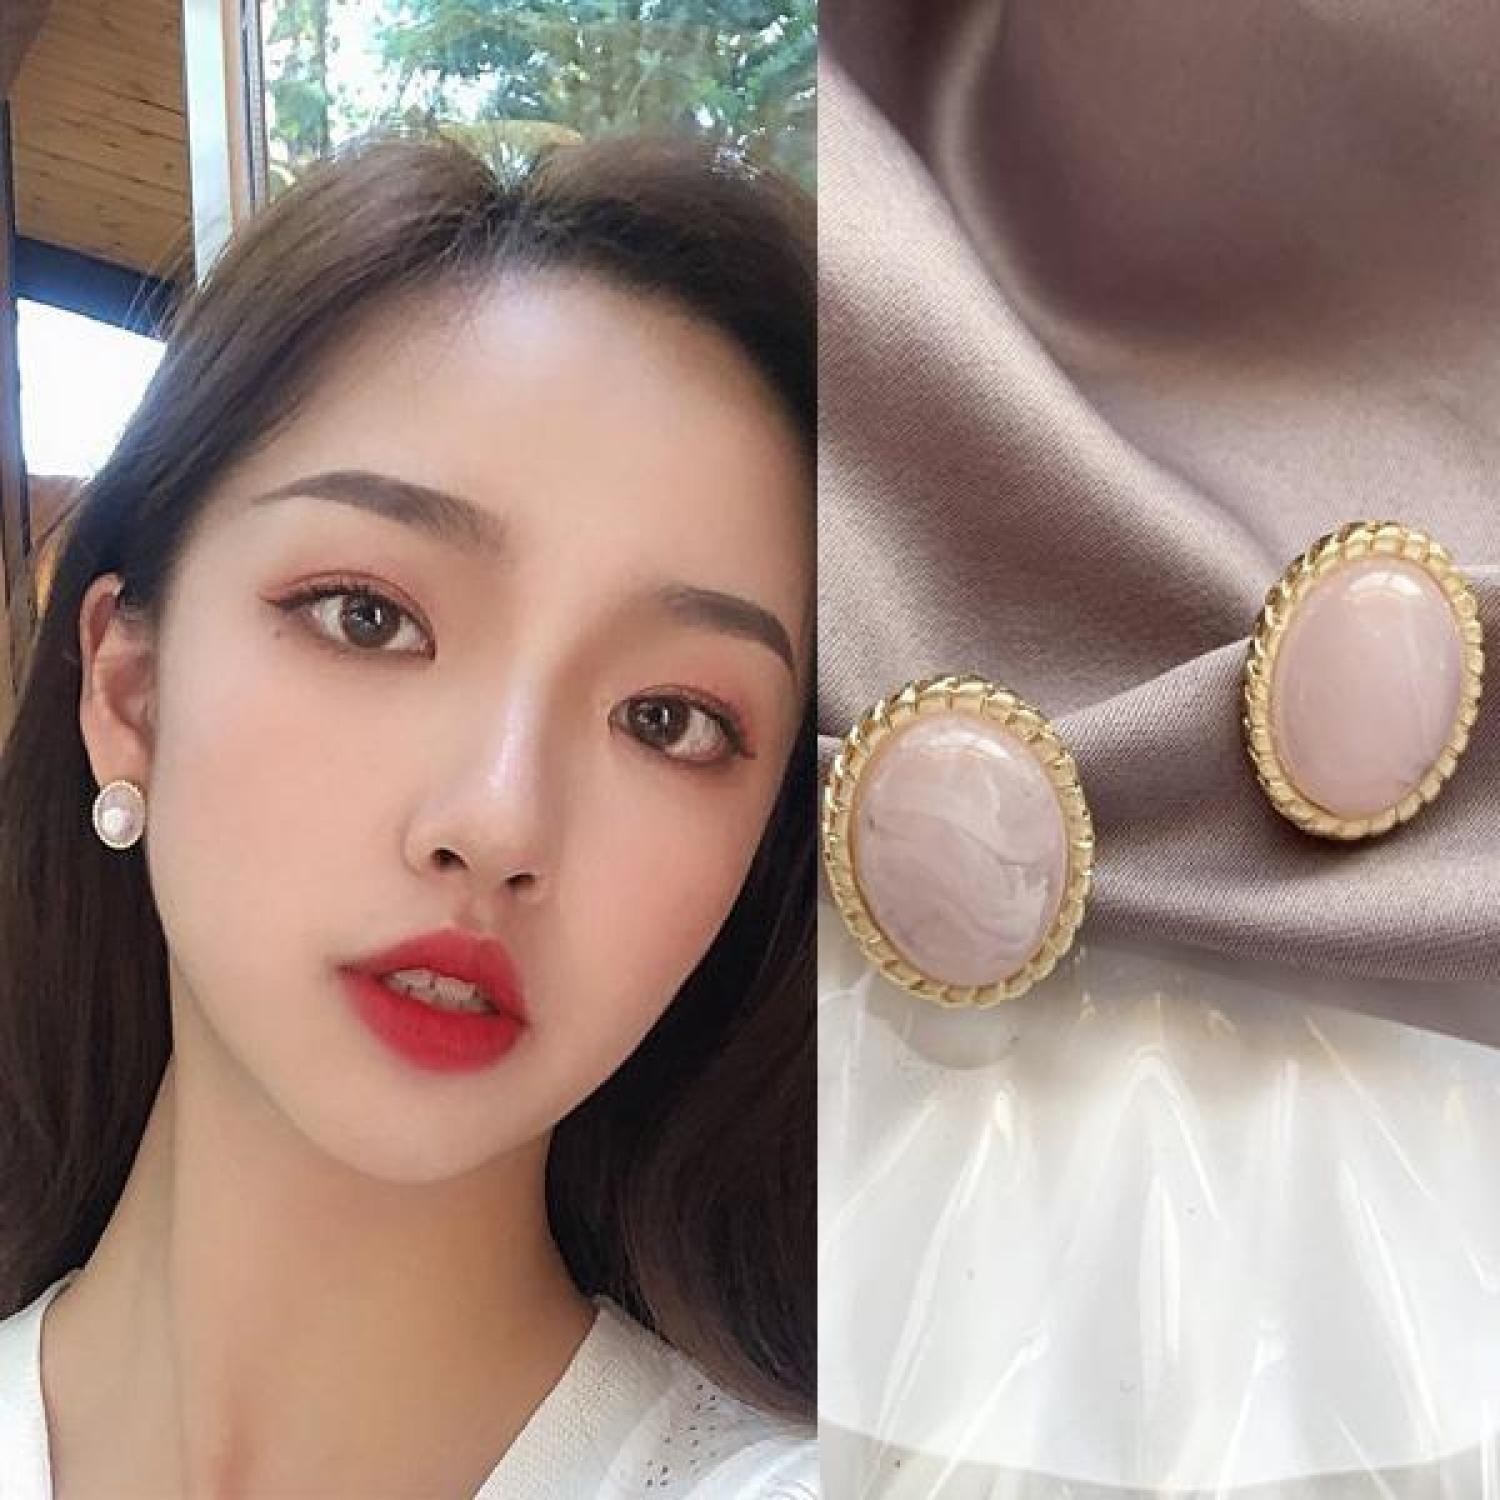 4pcsSet Safety Pin Studs Earrings for Women Gothic Fashion White Crystal  CZ Earrings Female Korean Jewelry Ear Cuff Accessories  Price history   Review  AliExpress Seller  onekiss Official Store  Alitoolsio